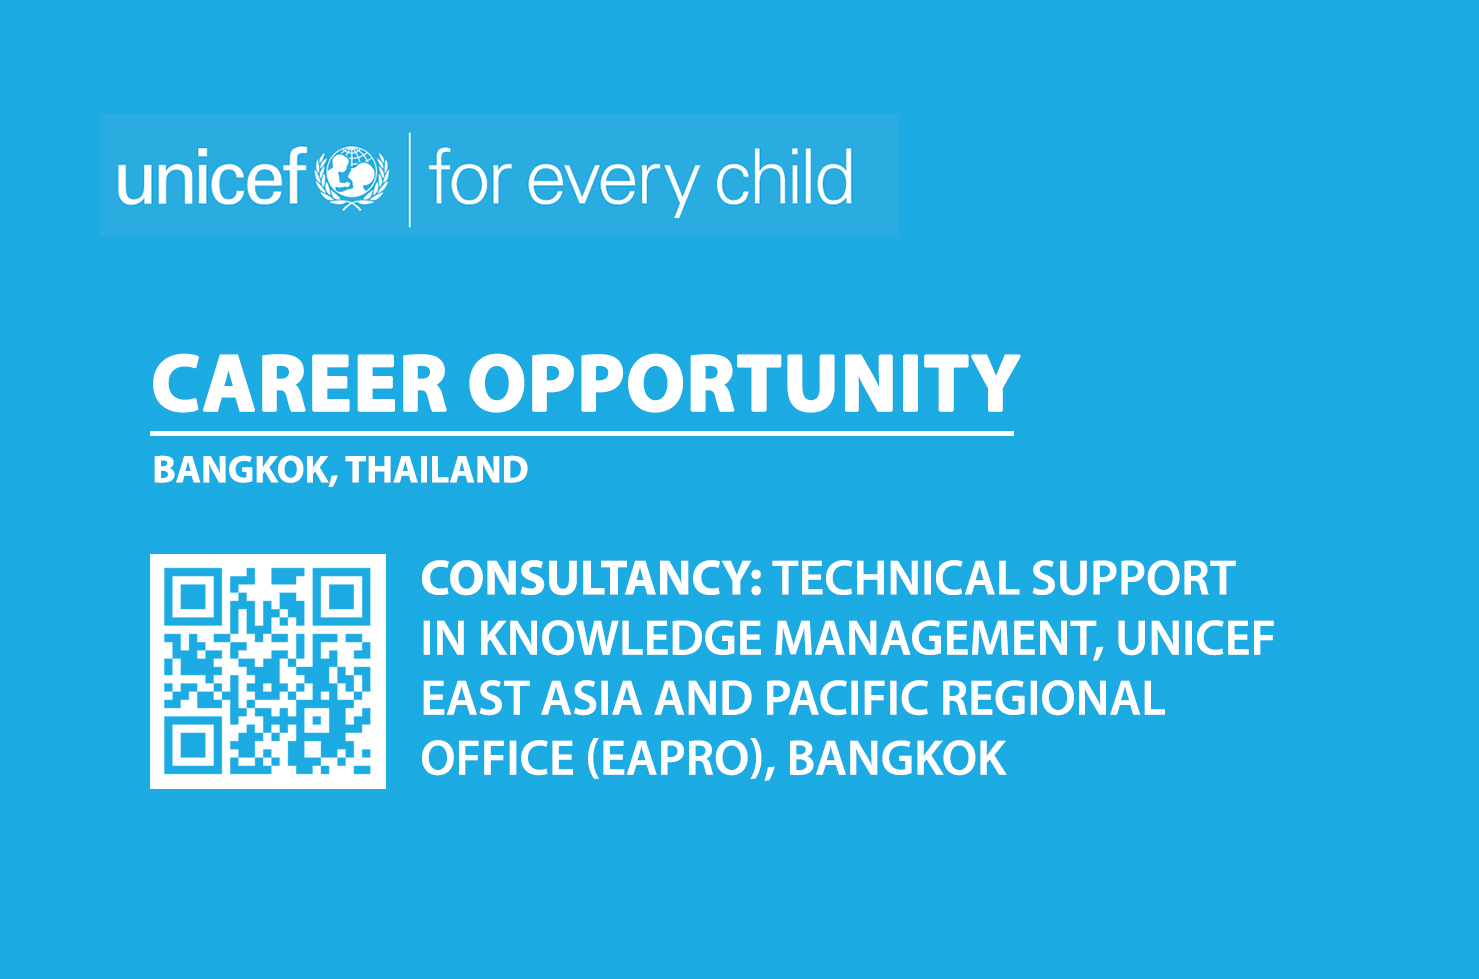 Consultancy: Technical Support in Knowledge Management, UNICEF East Asia and Pacific Regional Office (EAPRO), Bangkok